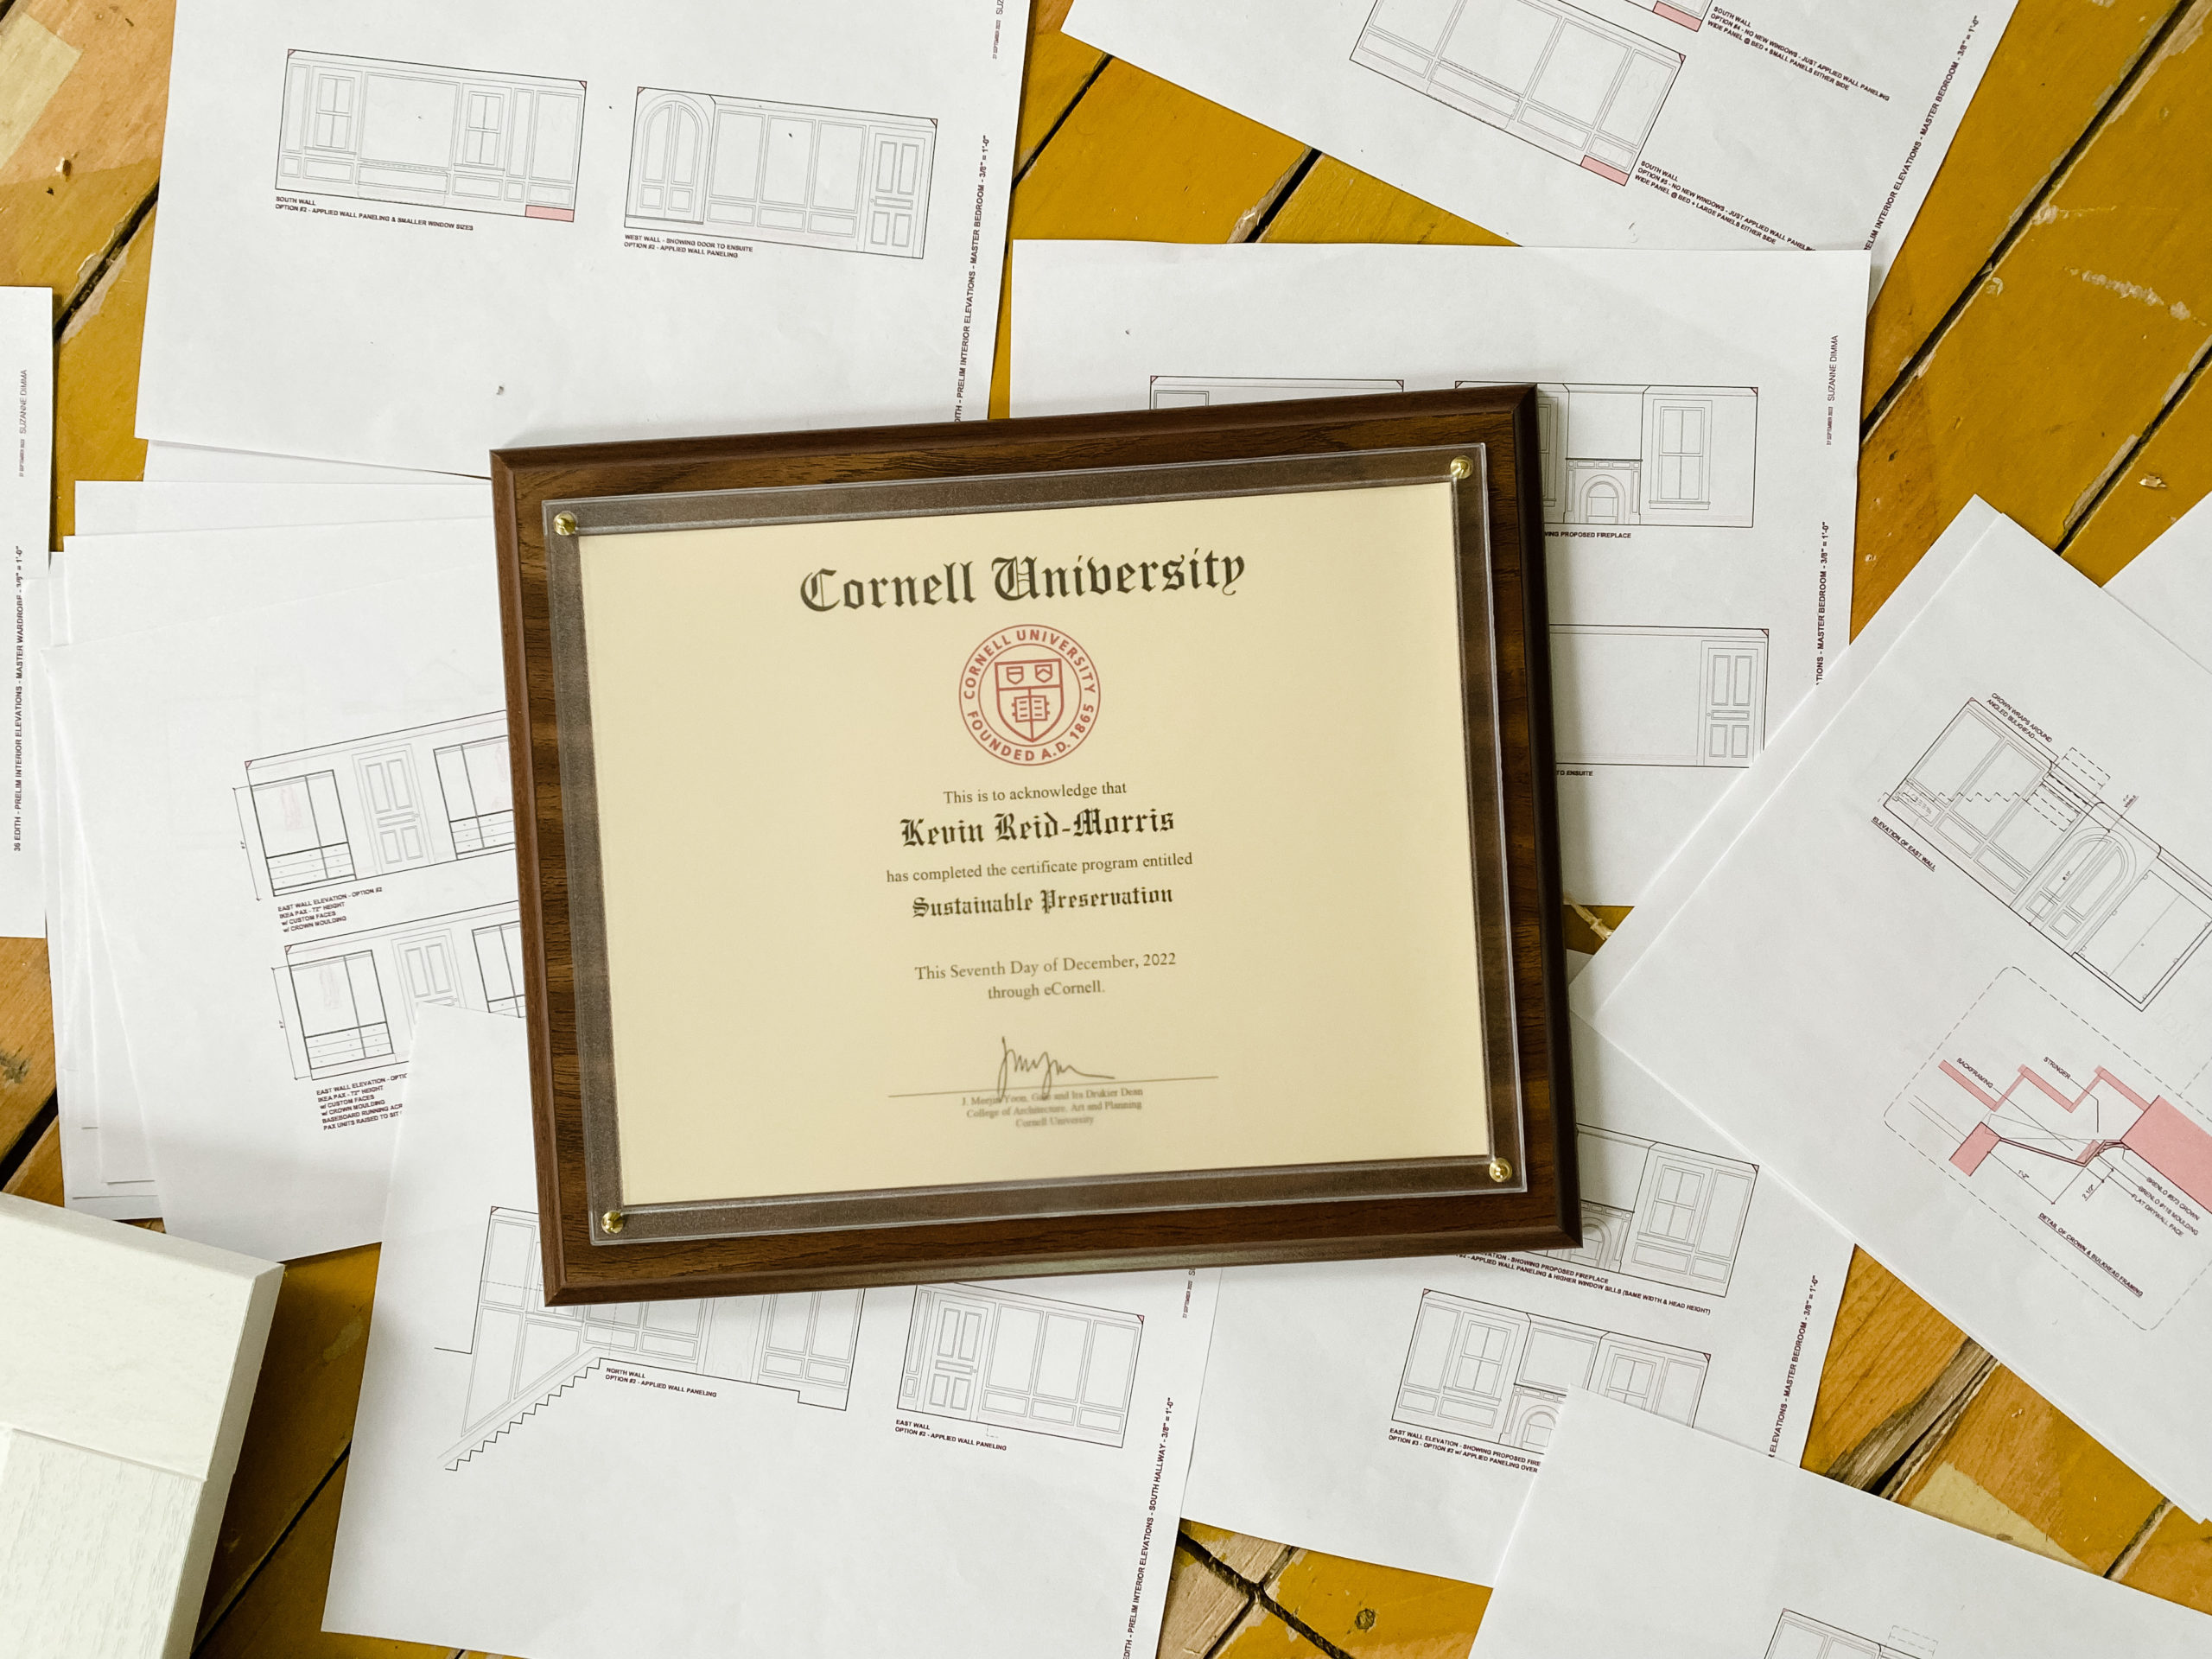 A graduation certificate that reads "Sustainable Preservation" from Cornell University sits amidst a set of building plans.